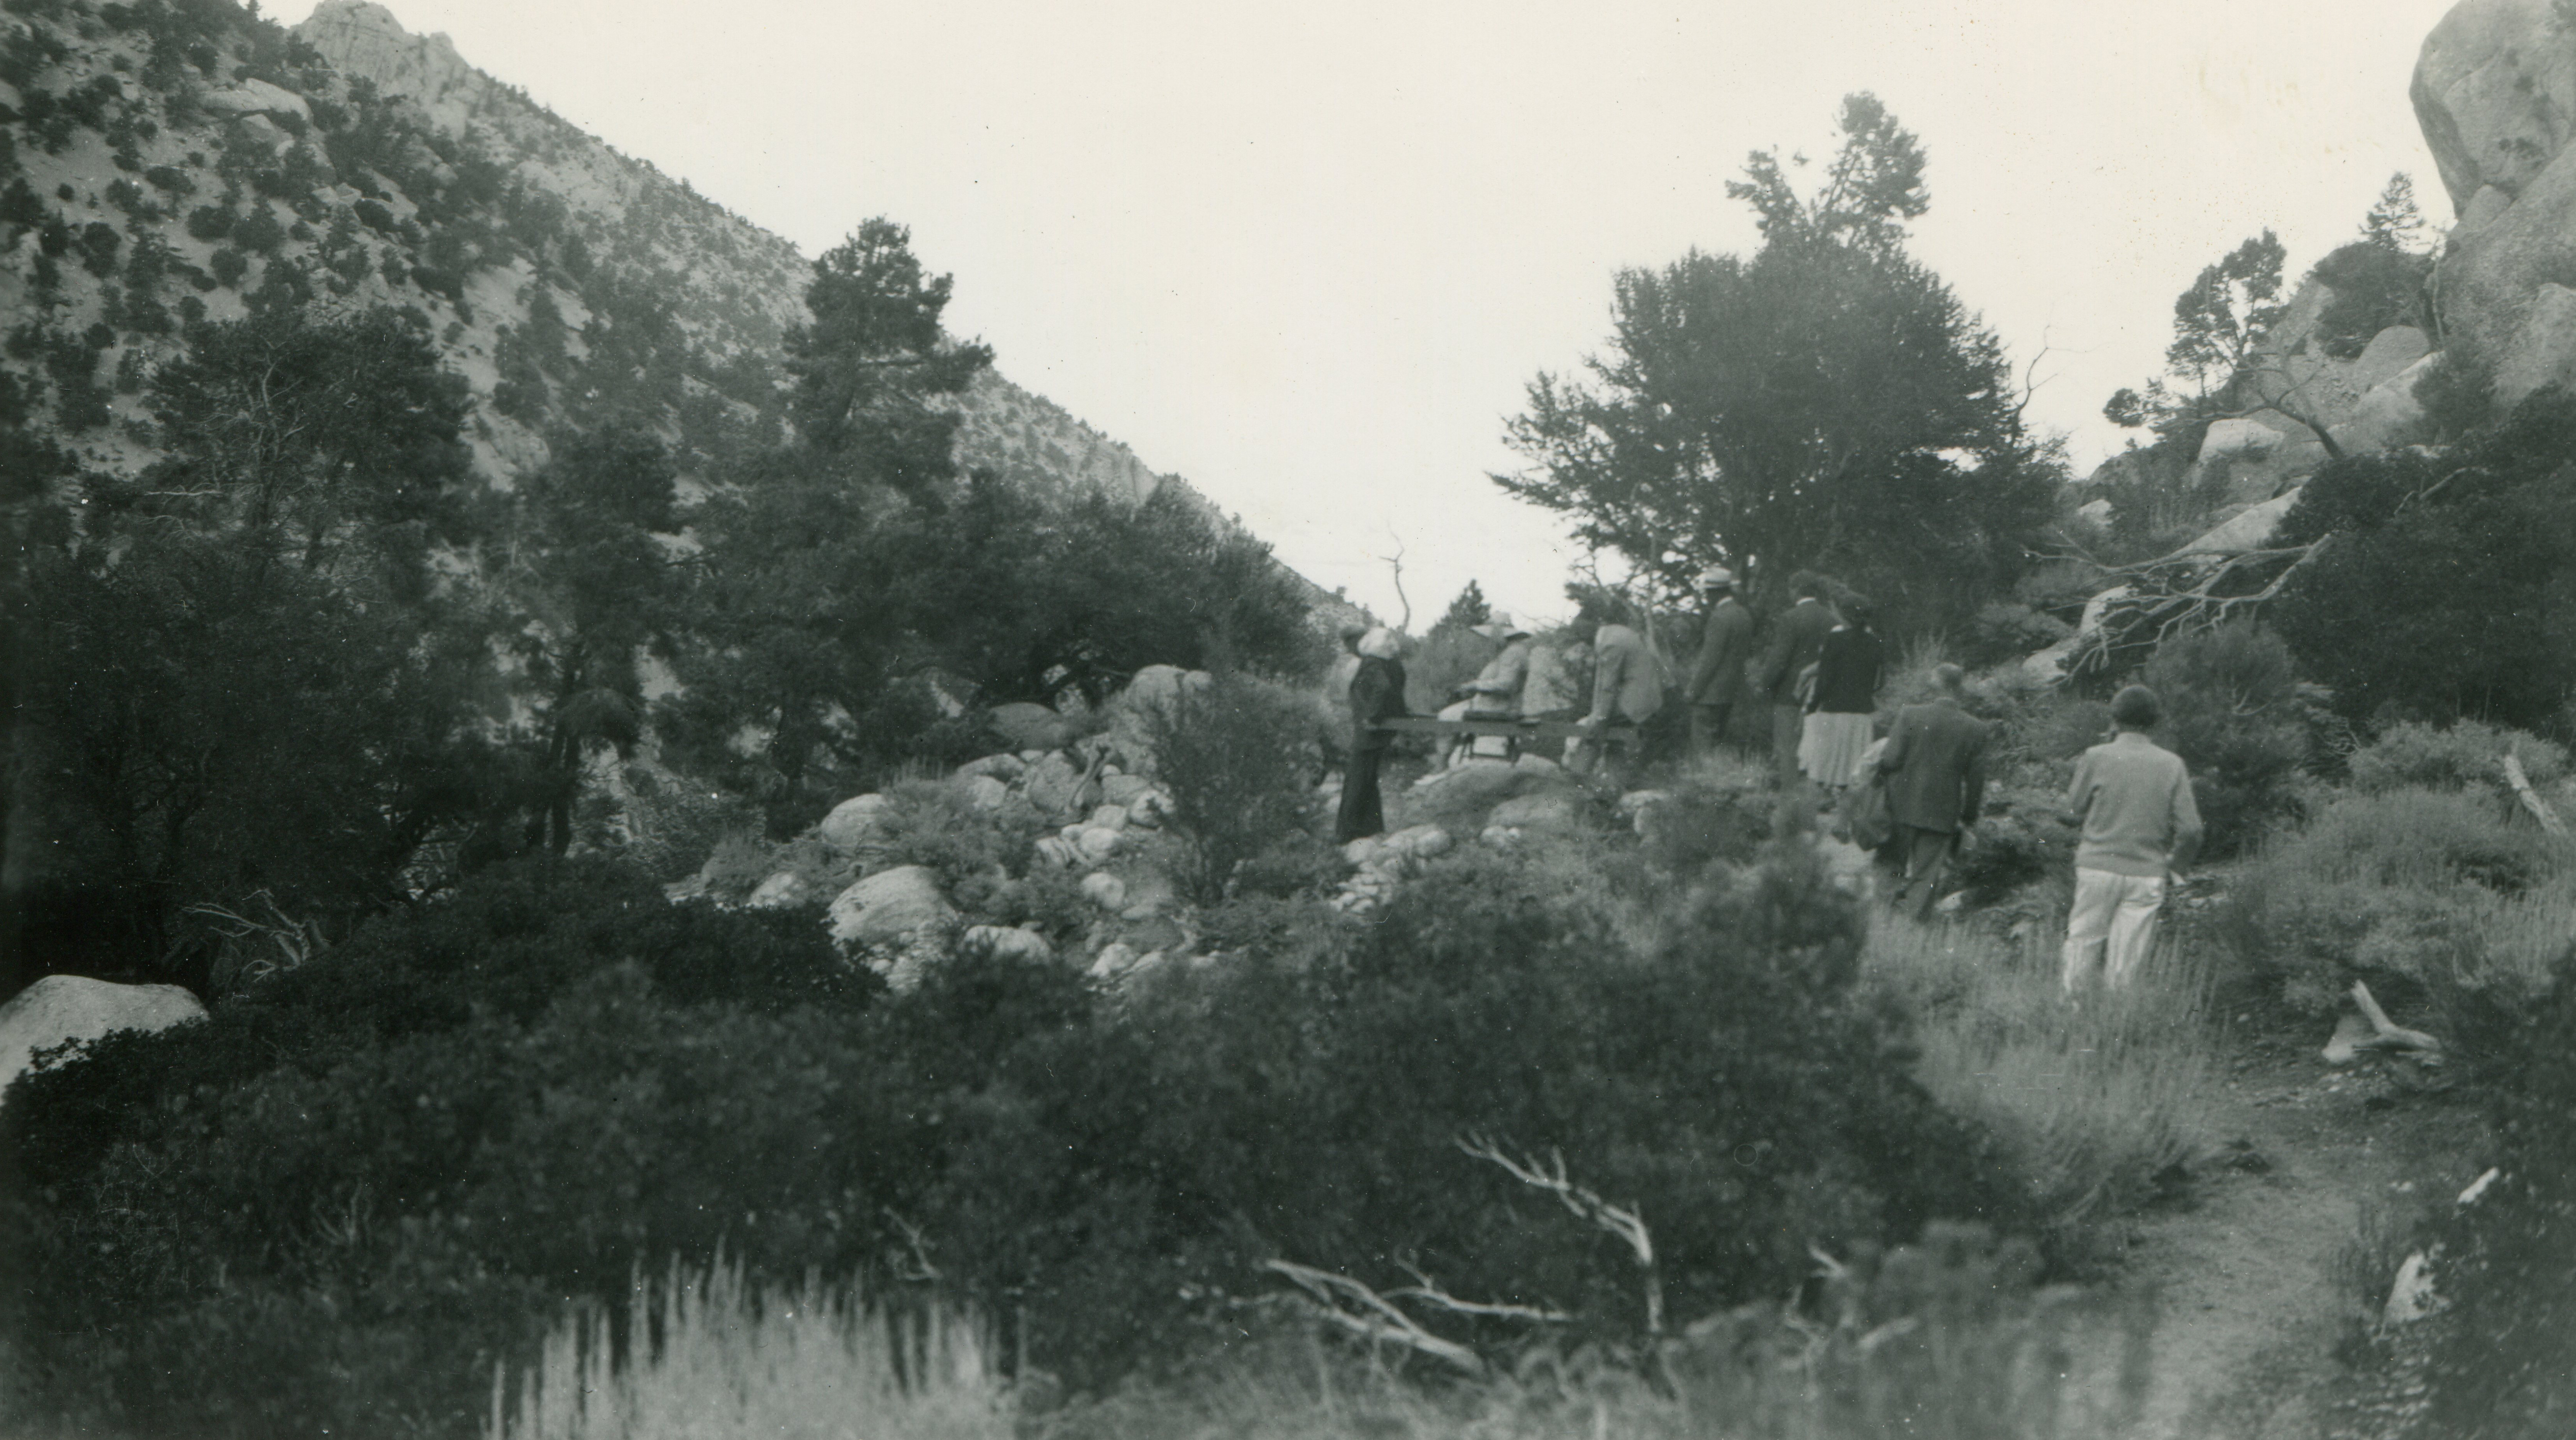 1950 Convention - Sherifa carried on a litter in the hills above the Ashrama